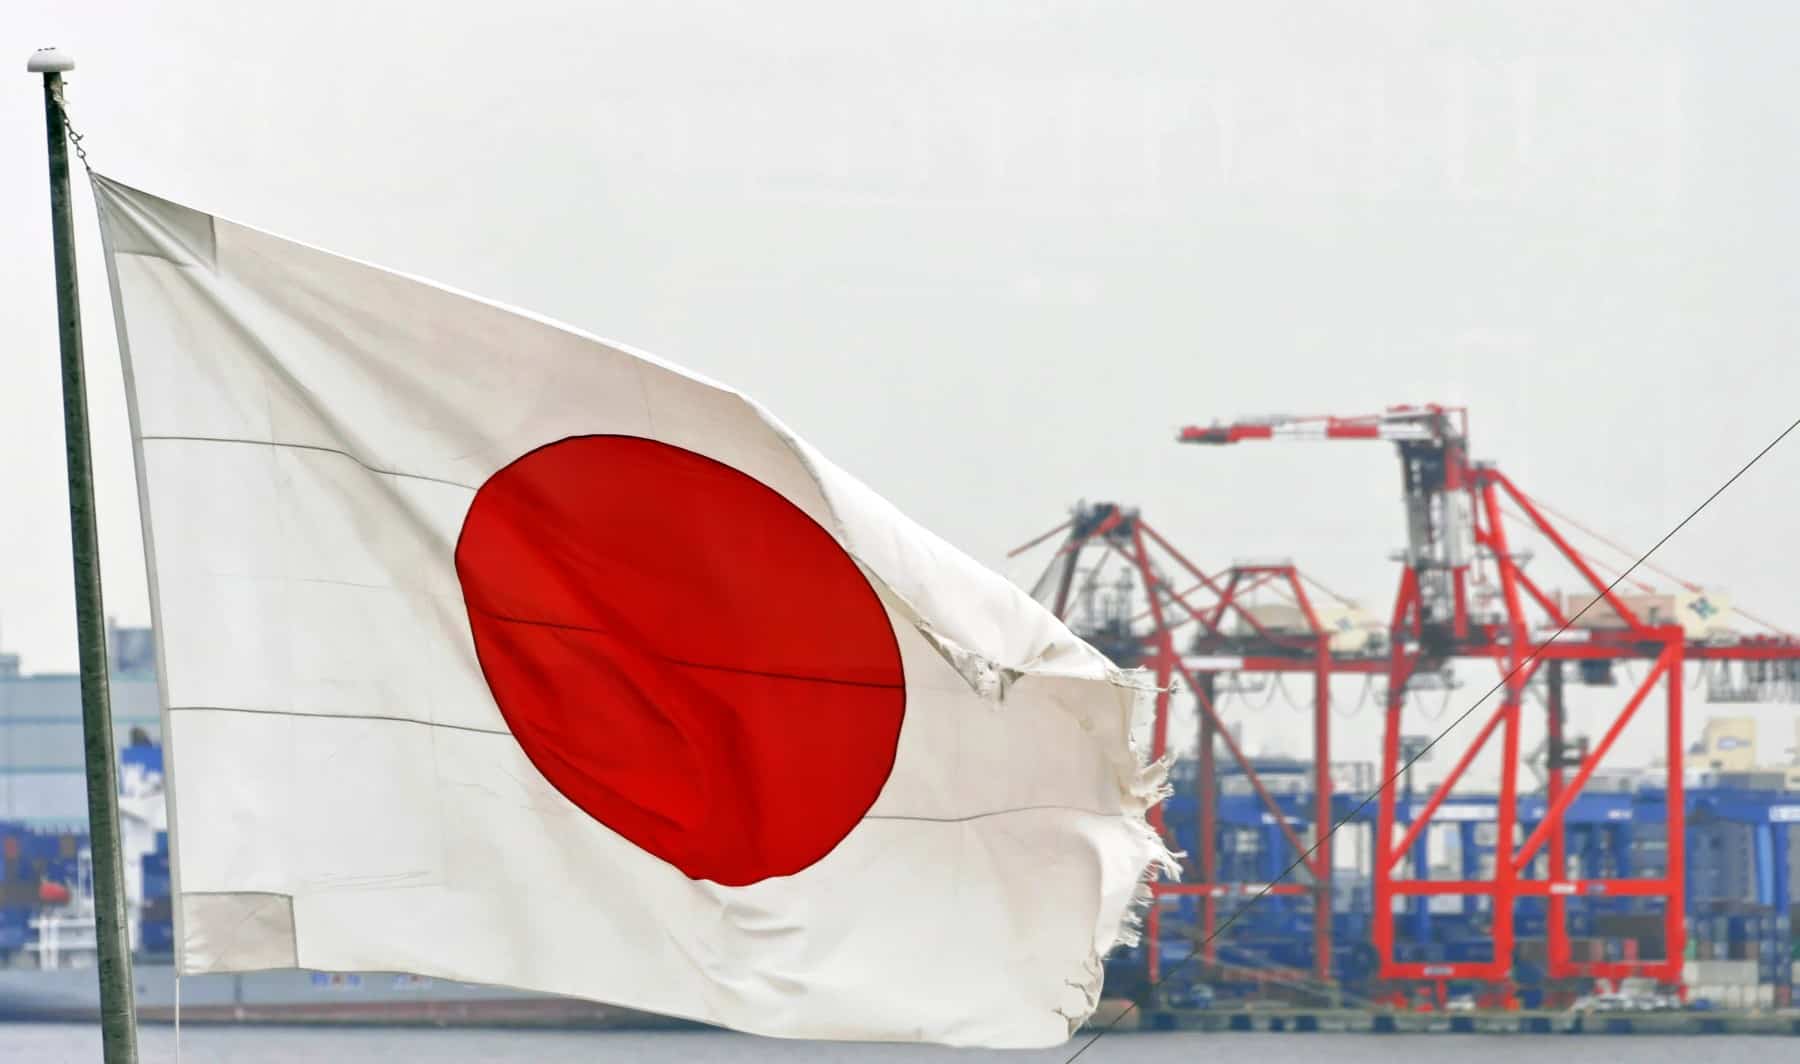 Japan has a five-year investment target of more than USD$13 billion to support developing countries such as those in Latin America.